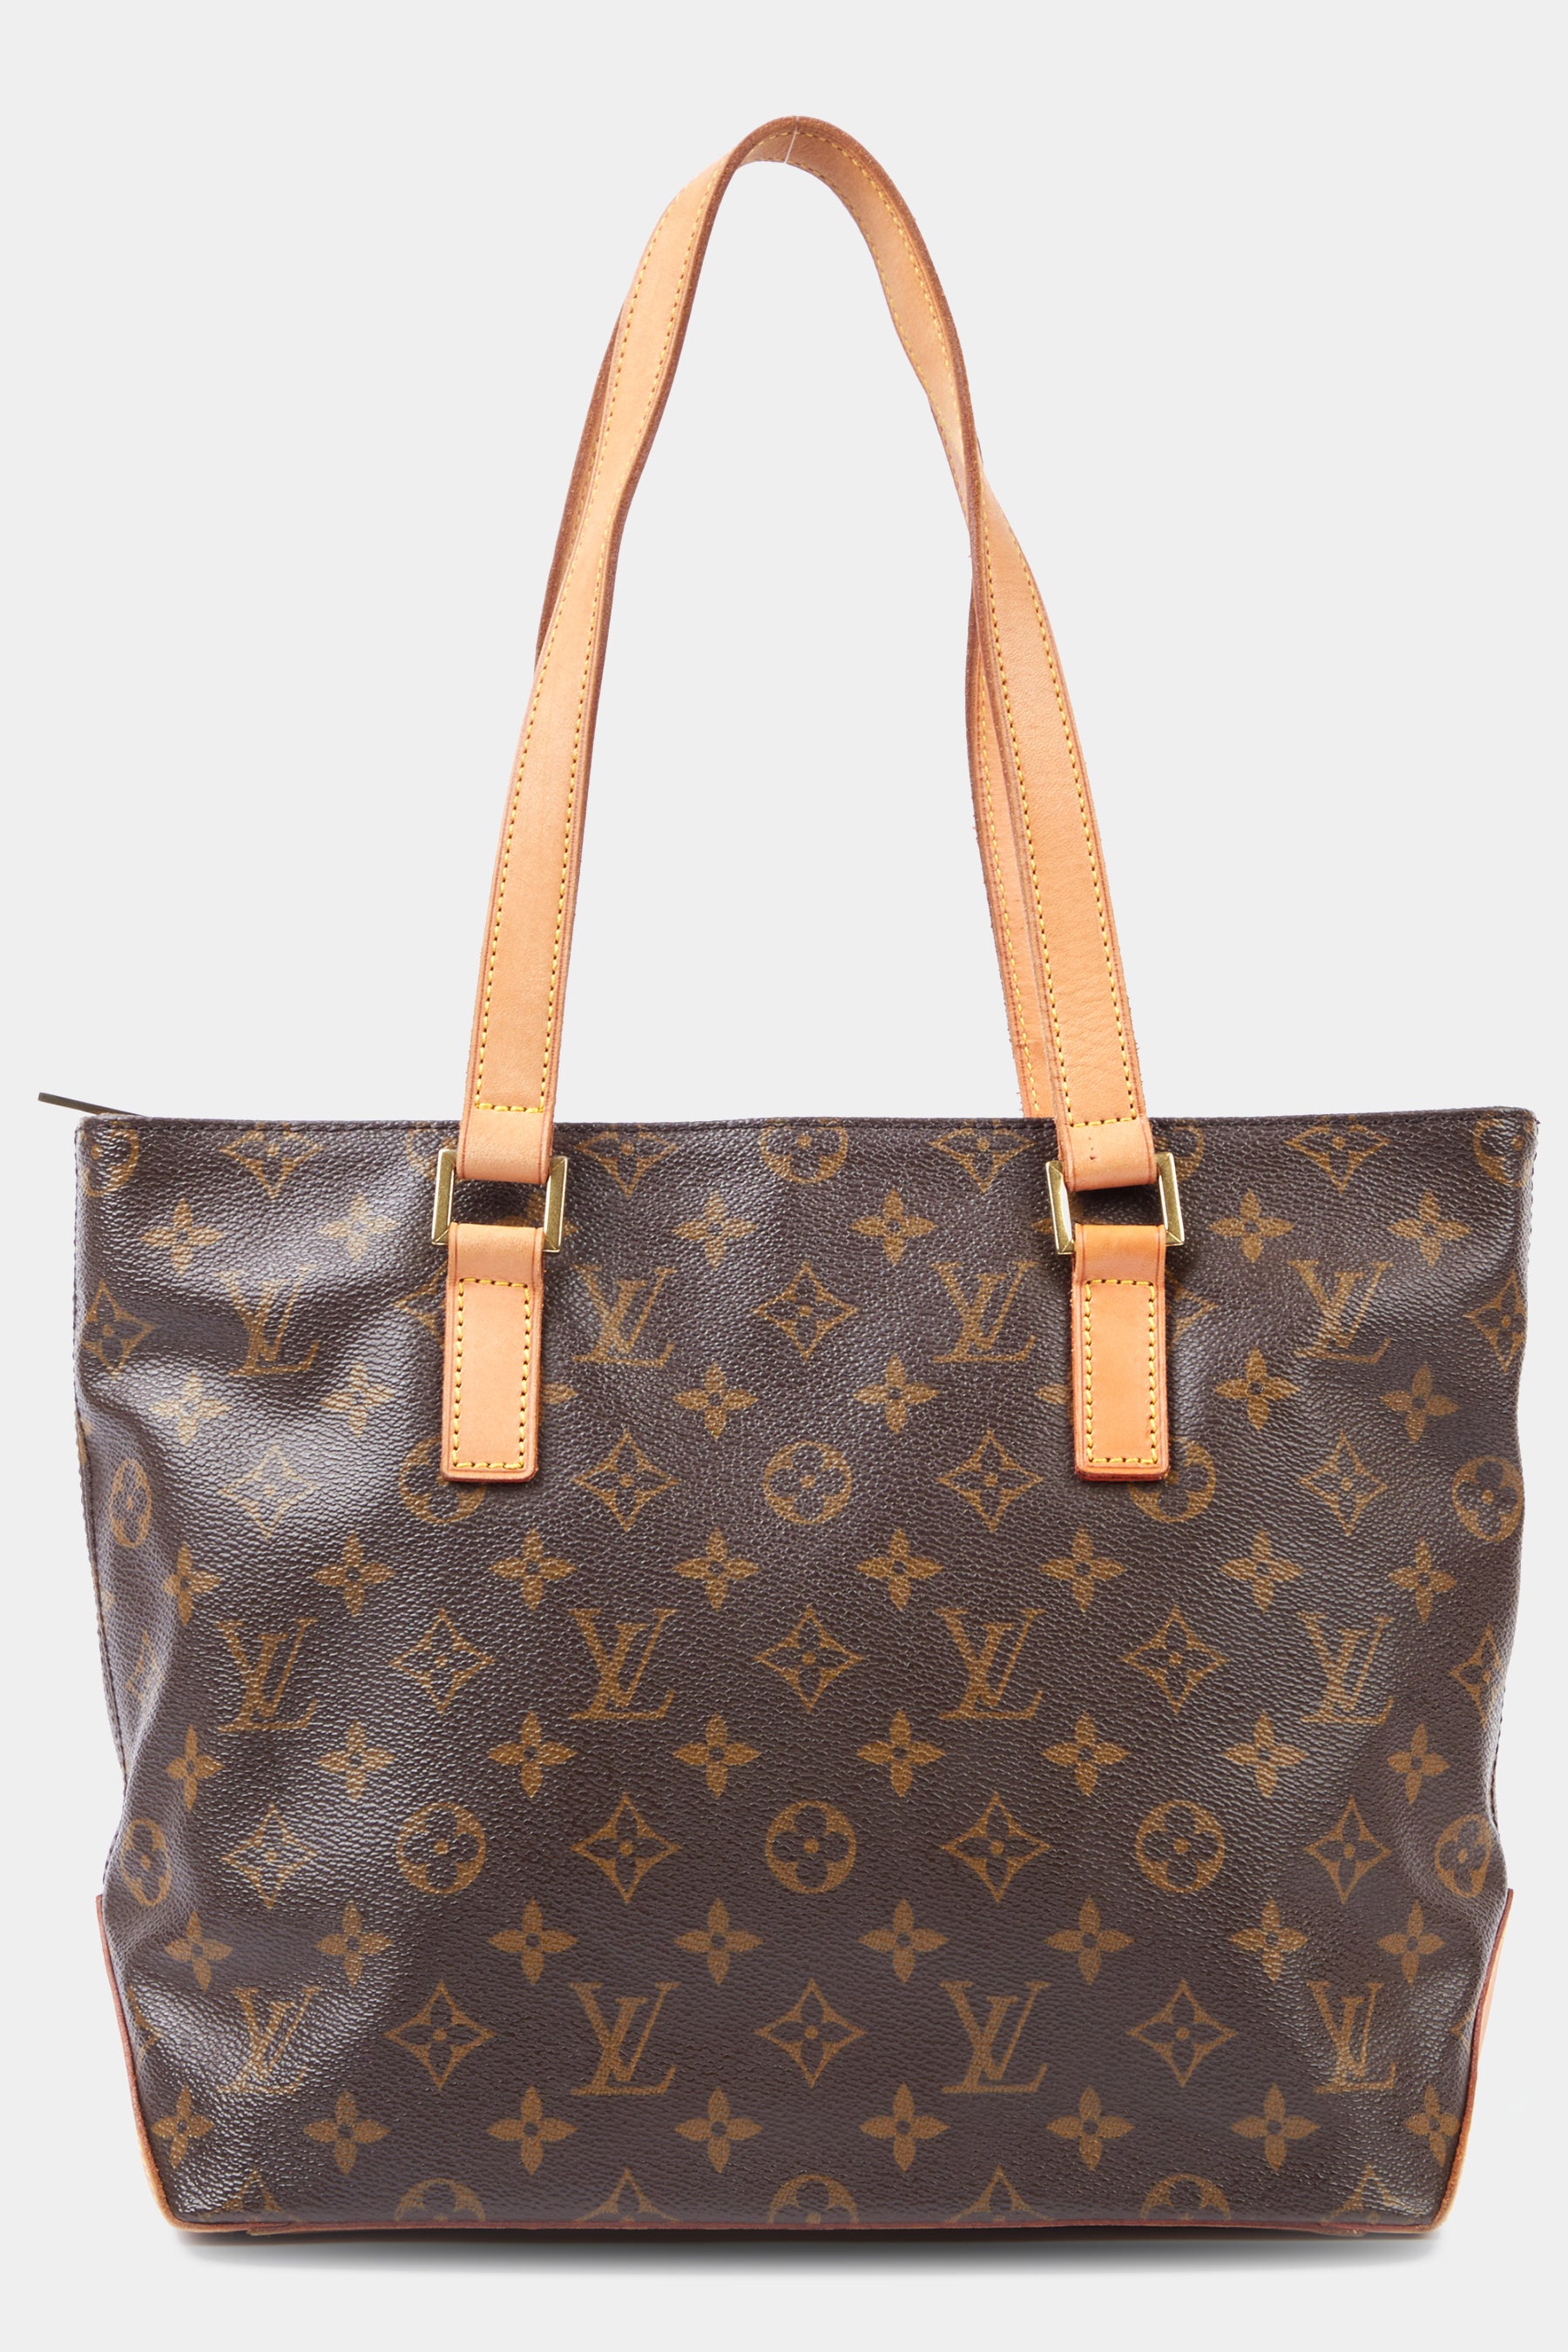 Louis Vuitton 2013 pre-owned Ikat Neverfull MM Tote Bag - Farfetch